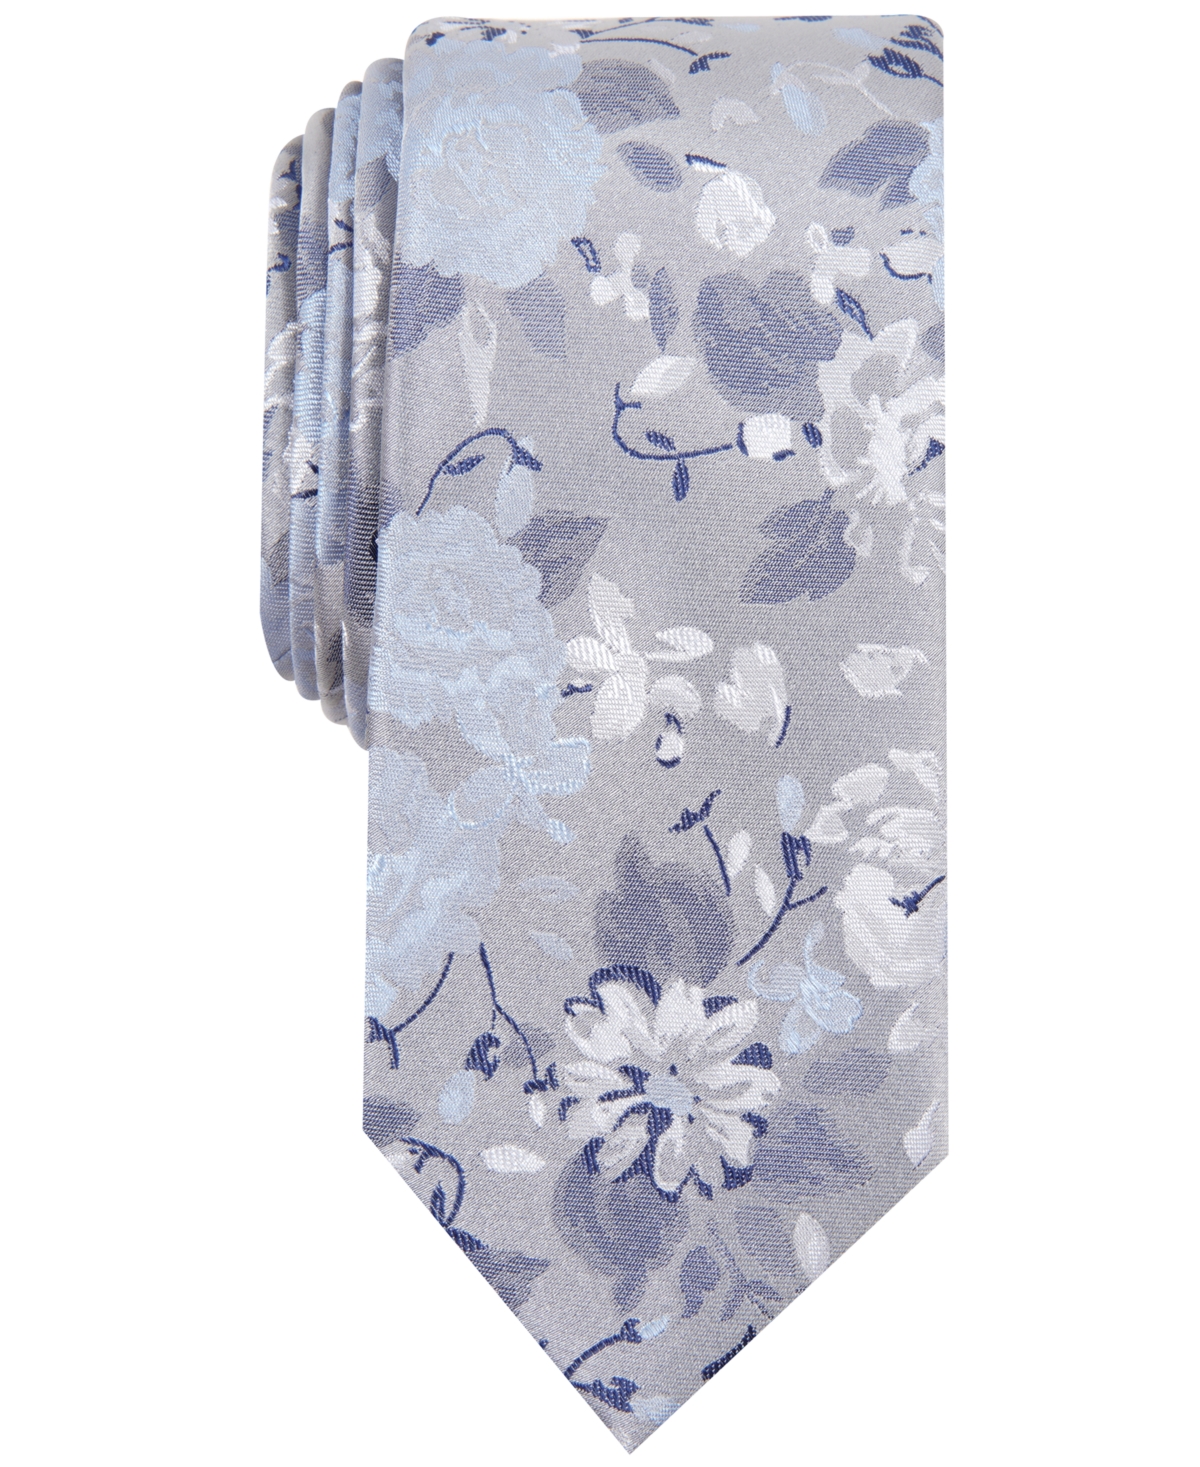 Men's Hilton Floral Slim Tie, Created for Macy's - Navy